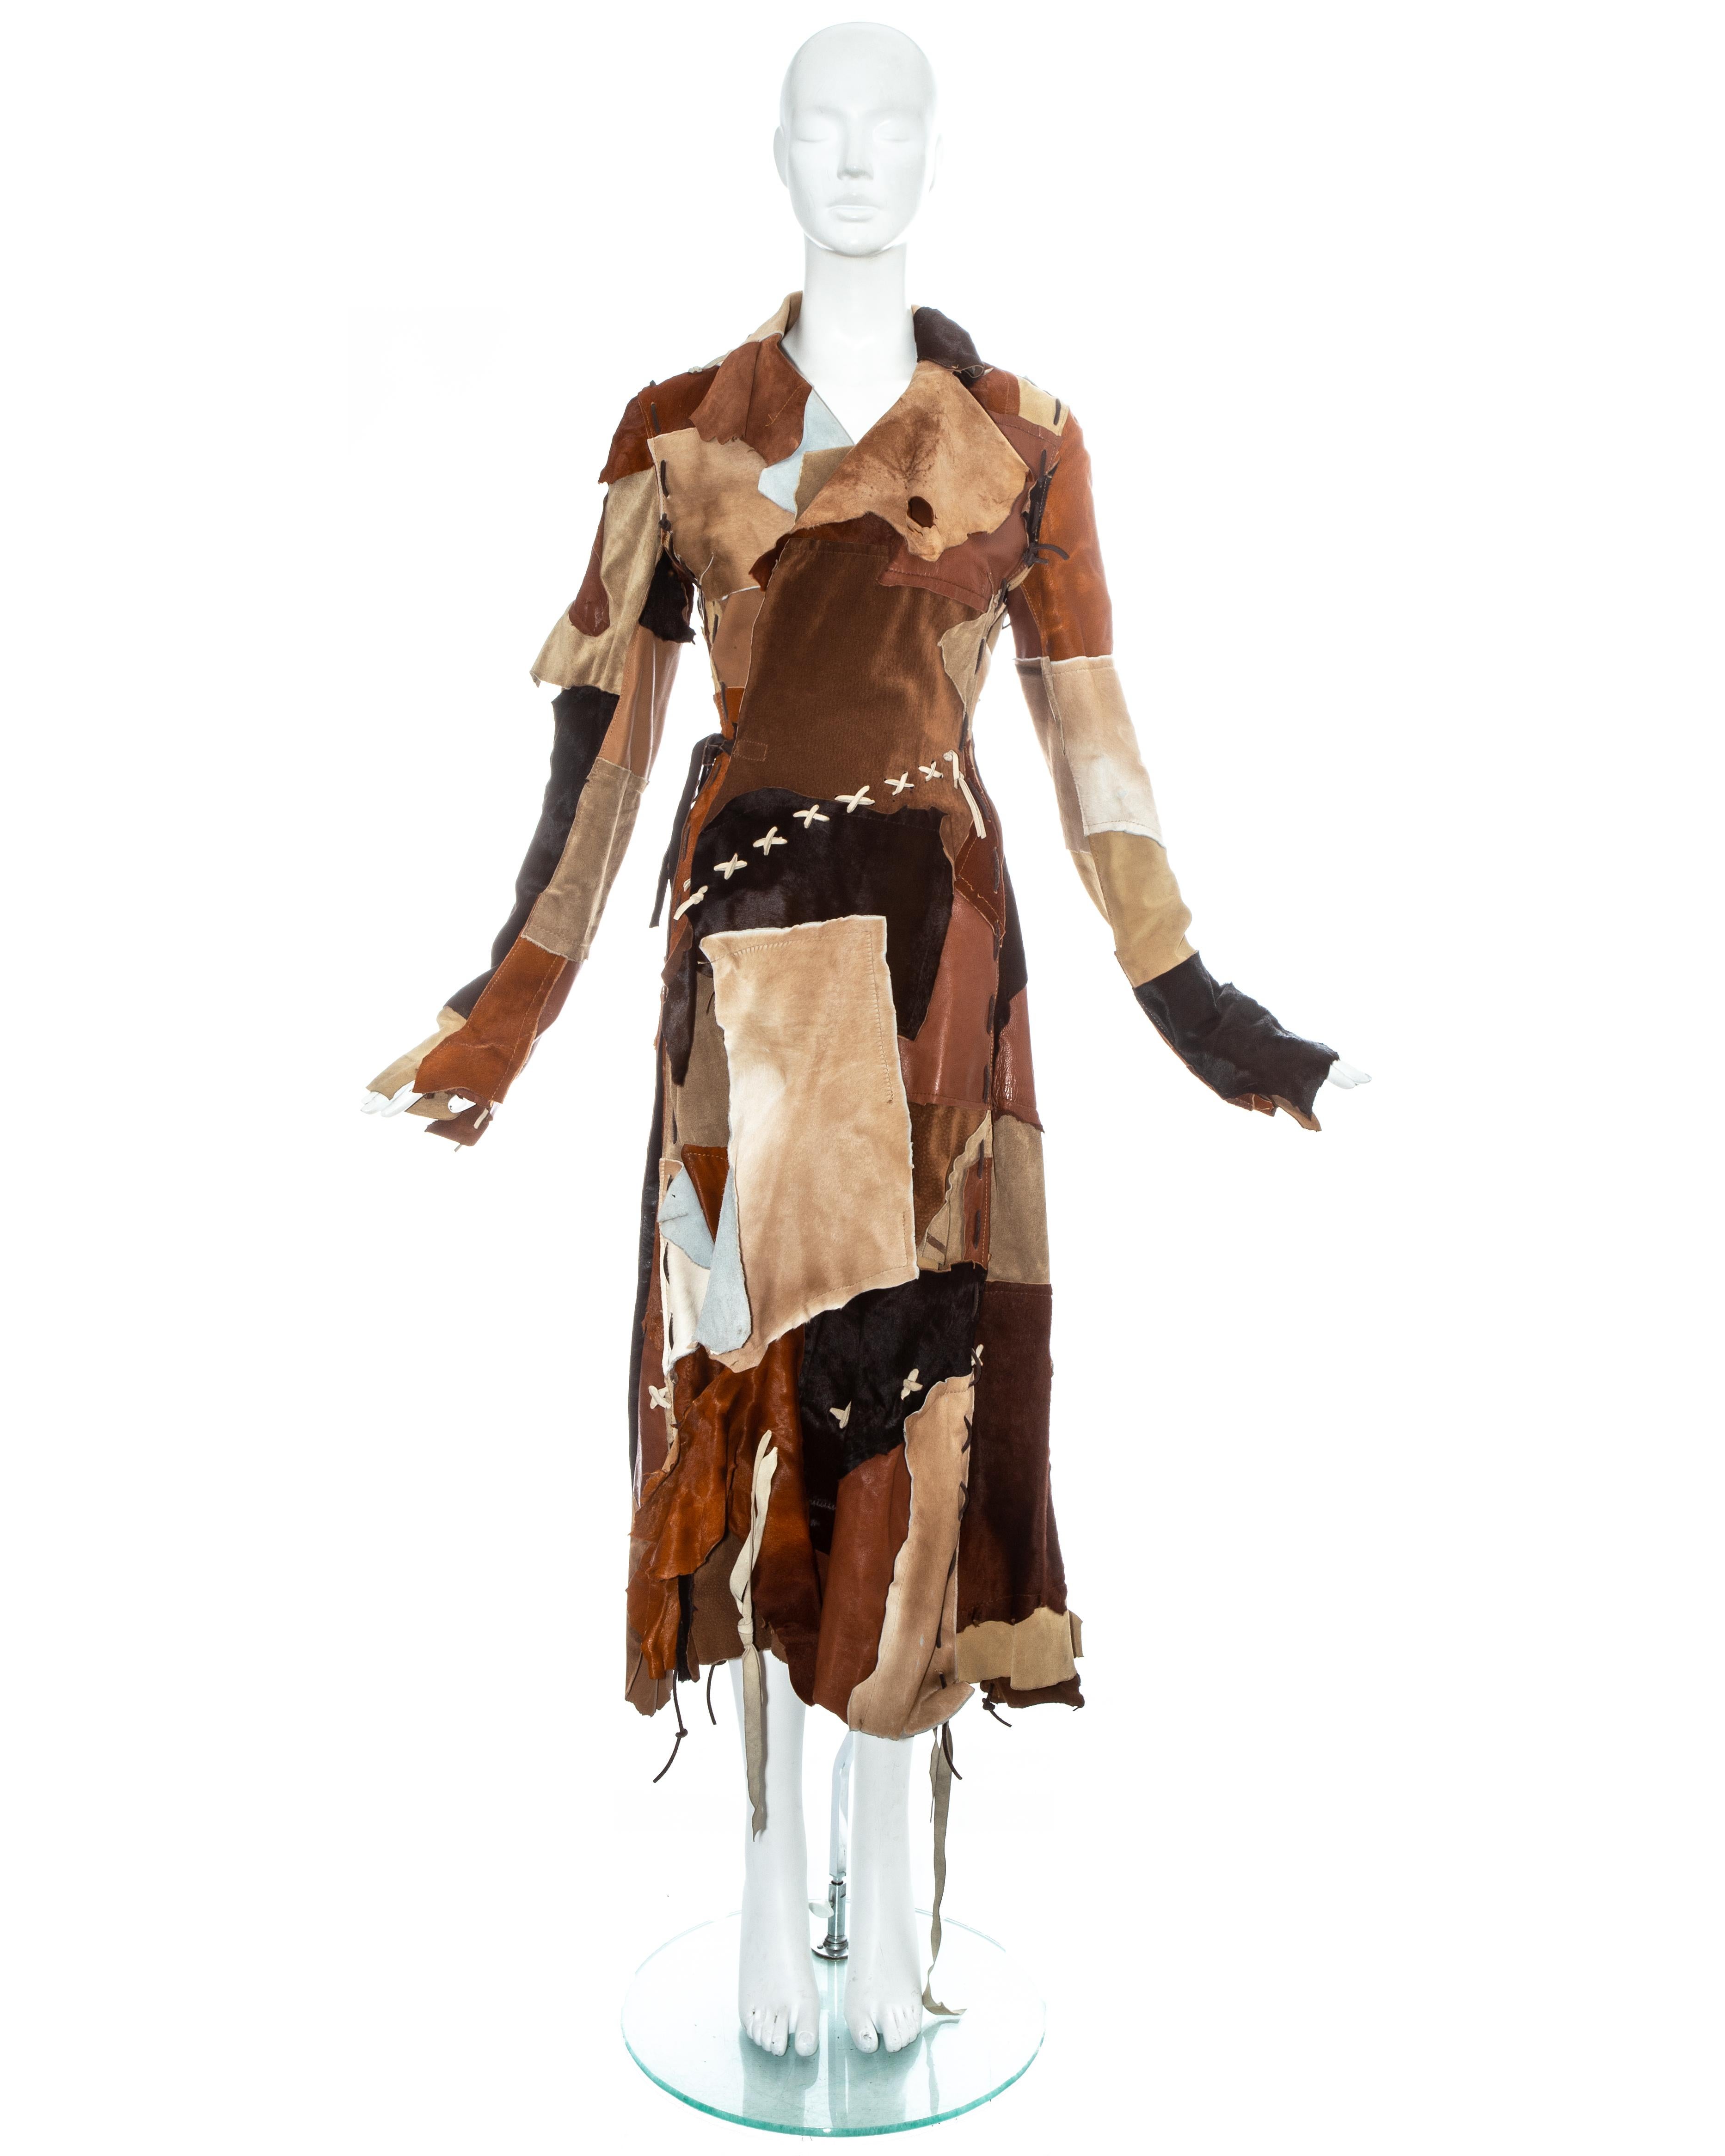 Dolce & Gabbana goat hide and leather patchwork coat with wrap fastening on the waist, raw edges and leather blanket stitches and tassels throughout. 

Fall-Winter 2002